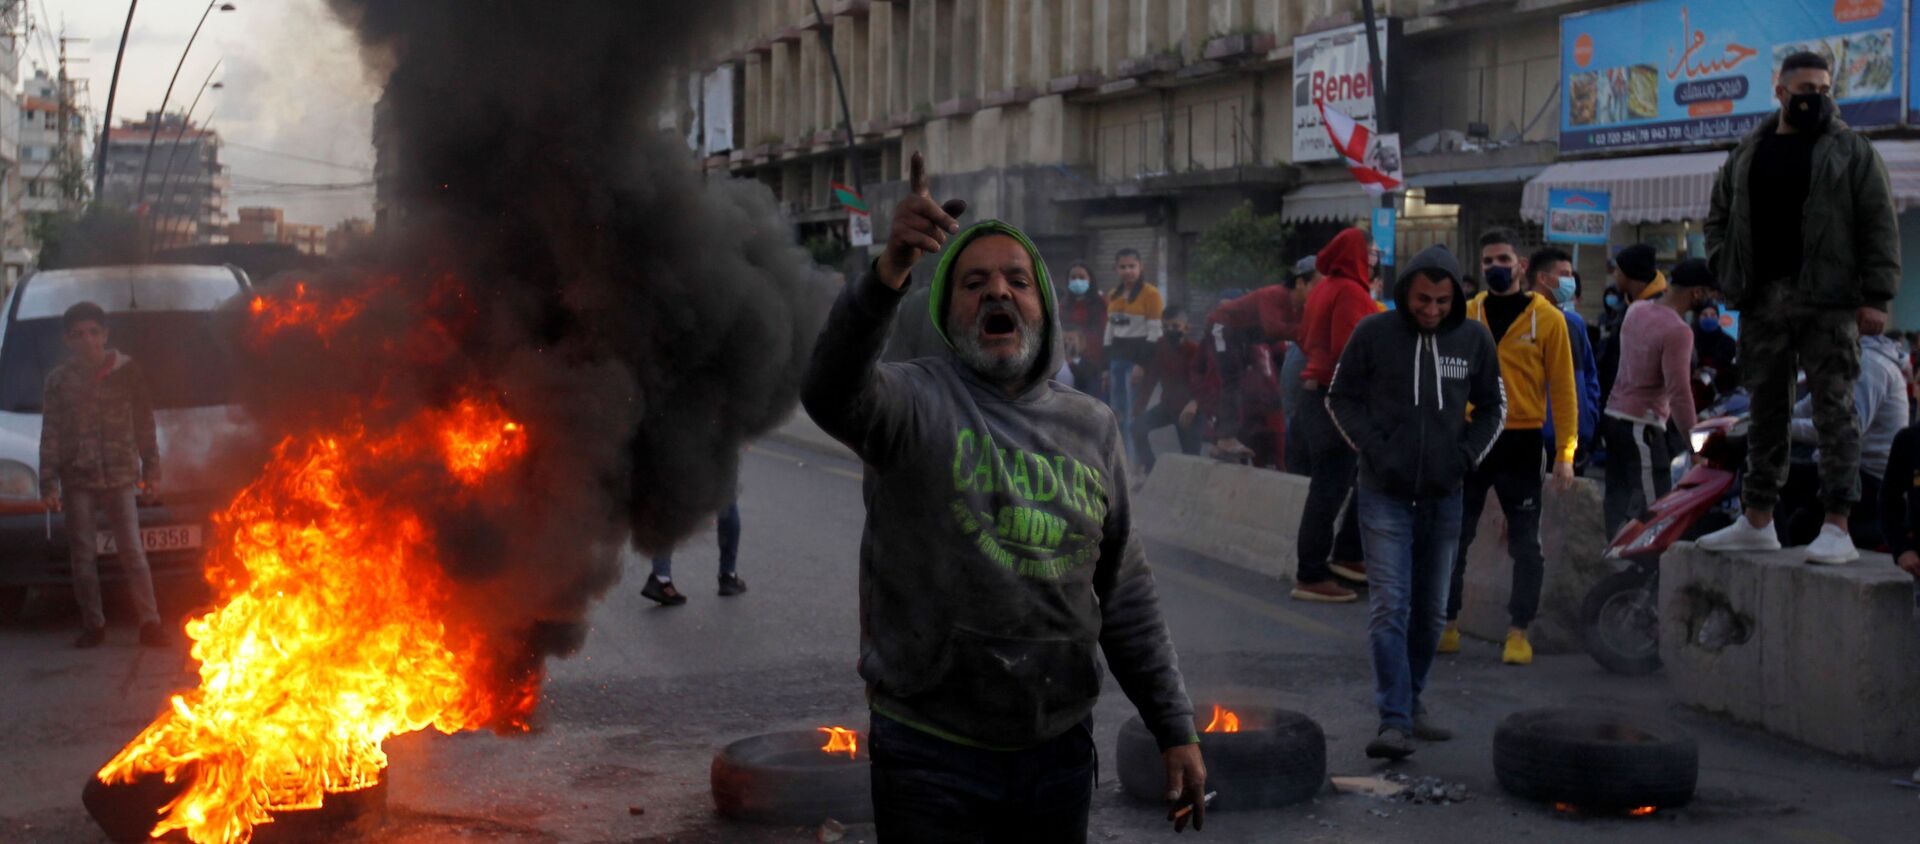 A demonstrator gestures during a protest against the fall in Lebanese pound currency and mounting economic hardships, in Sidon, Lebanon March 8, 2021 - Sputnik International, 1920, 10.03.2021